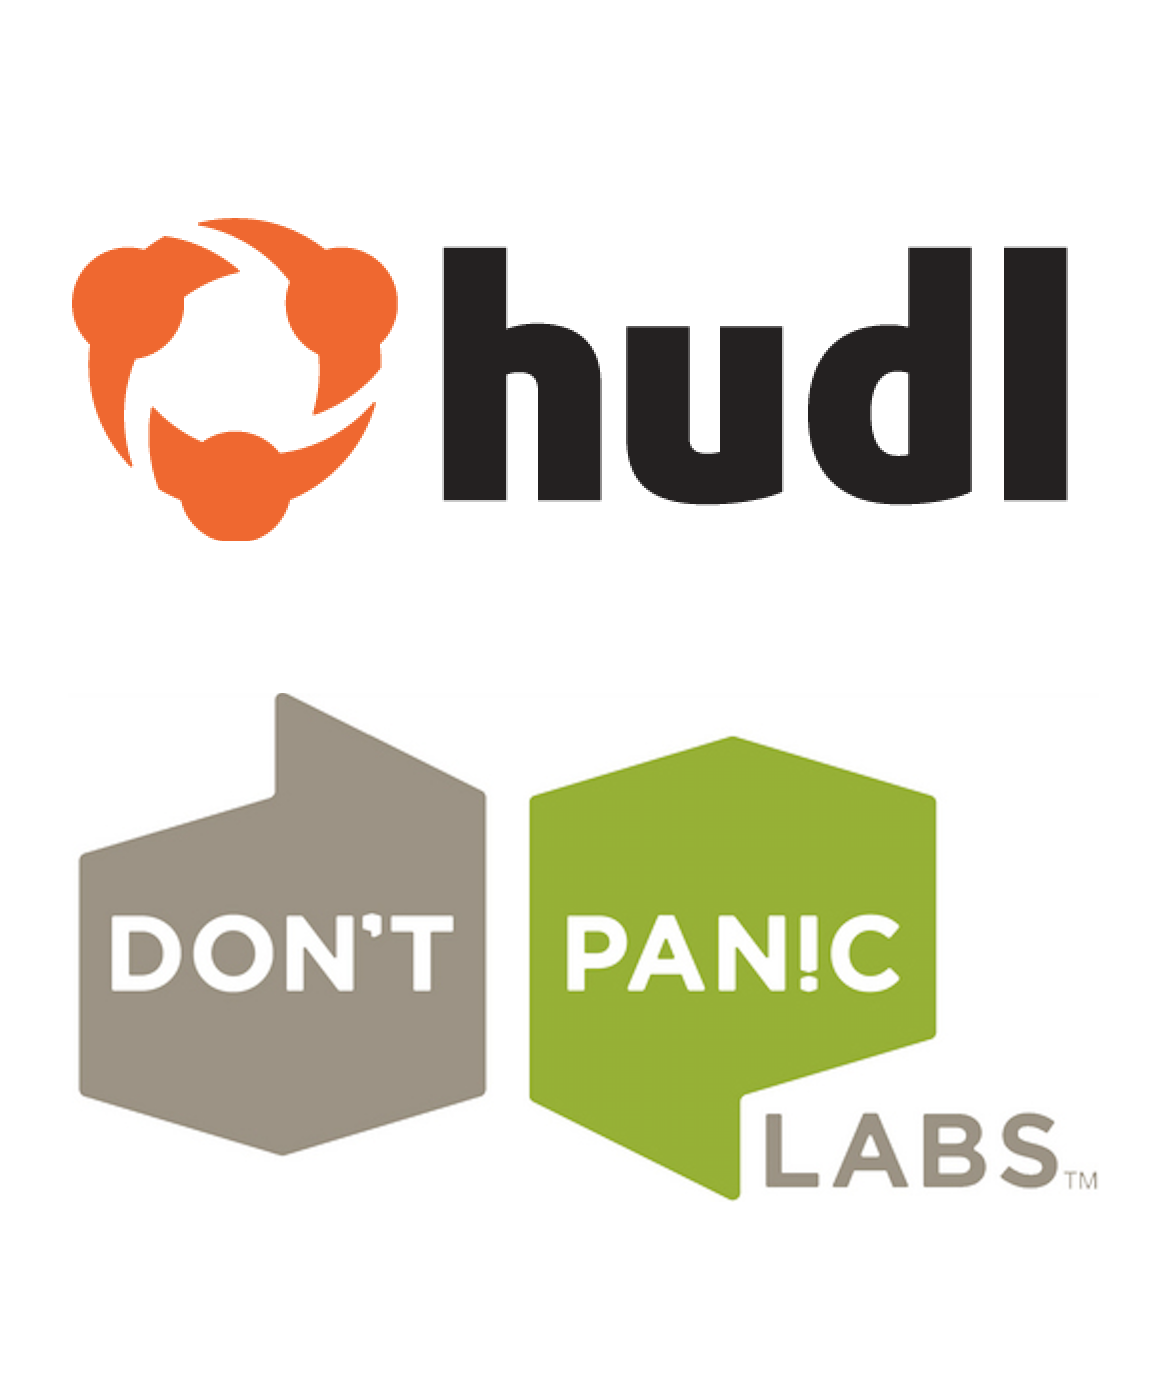 Hudl and Don't Panic Labs